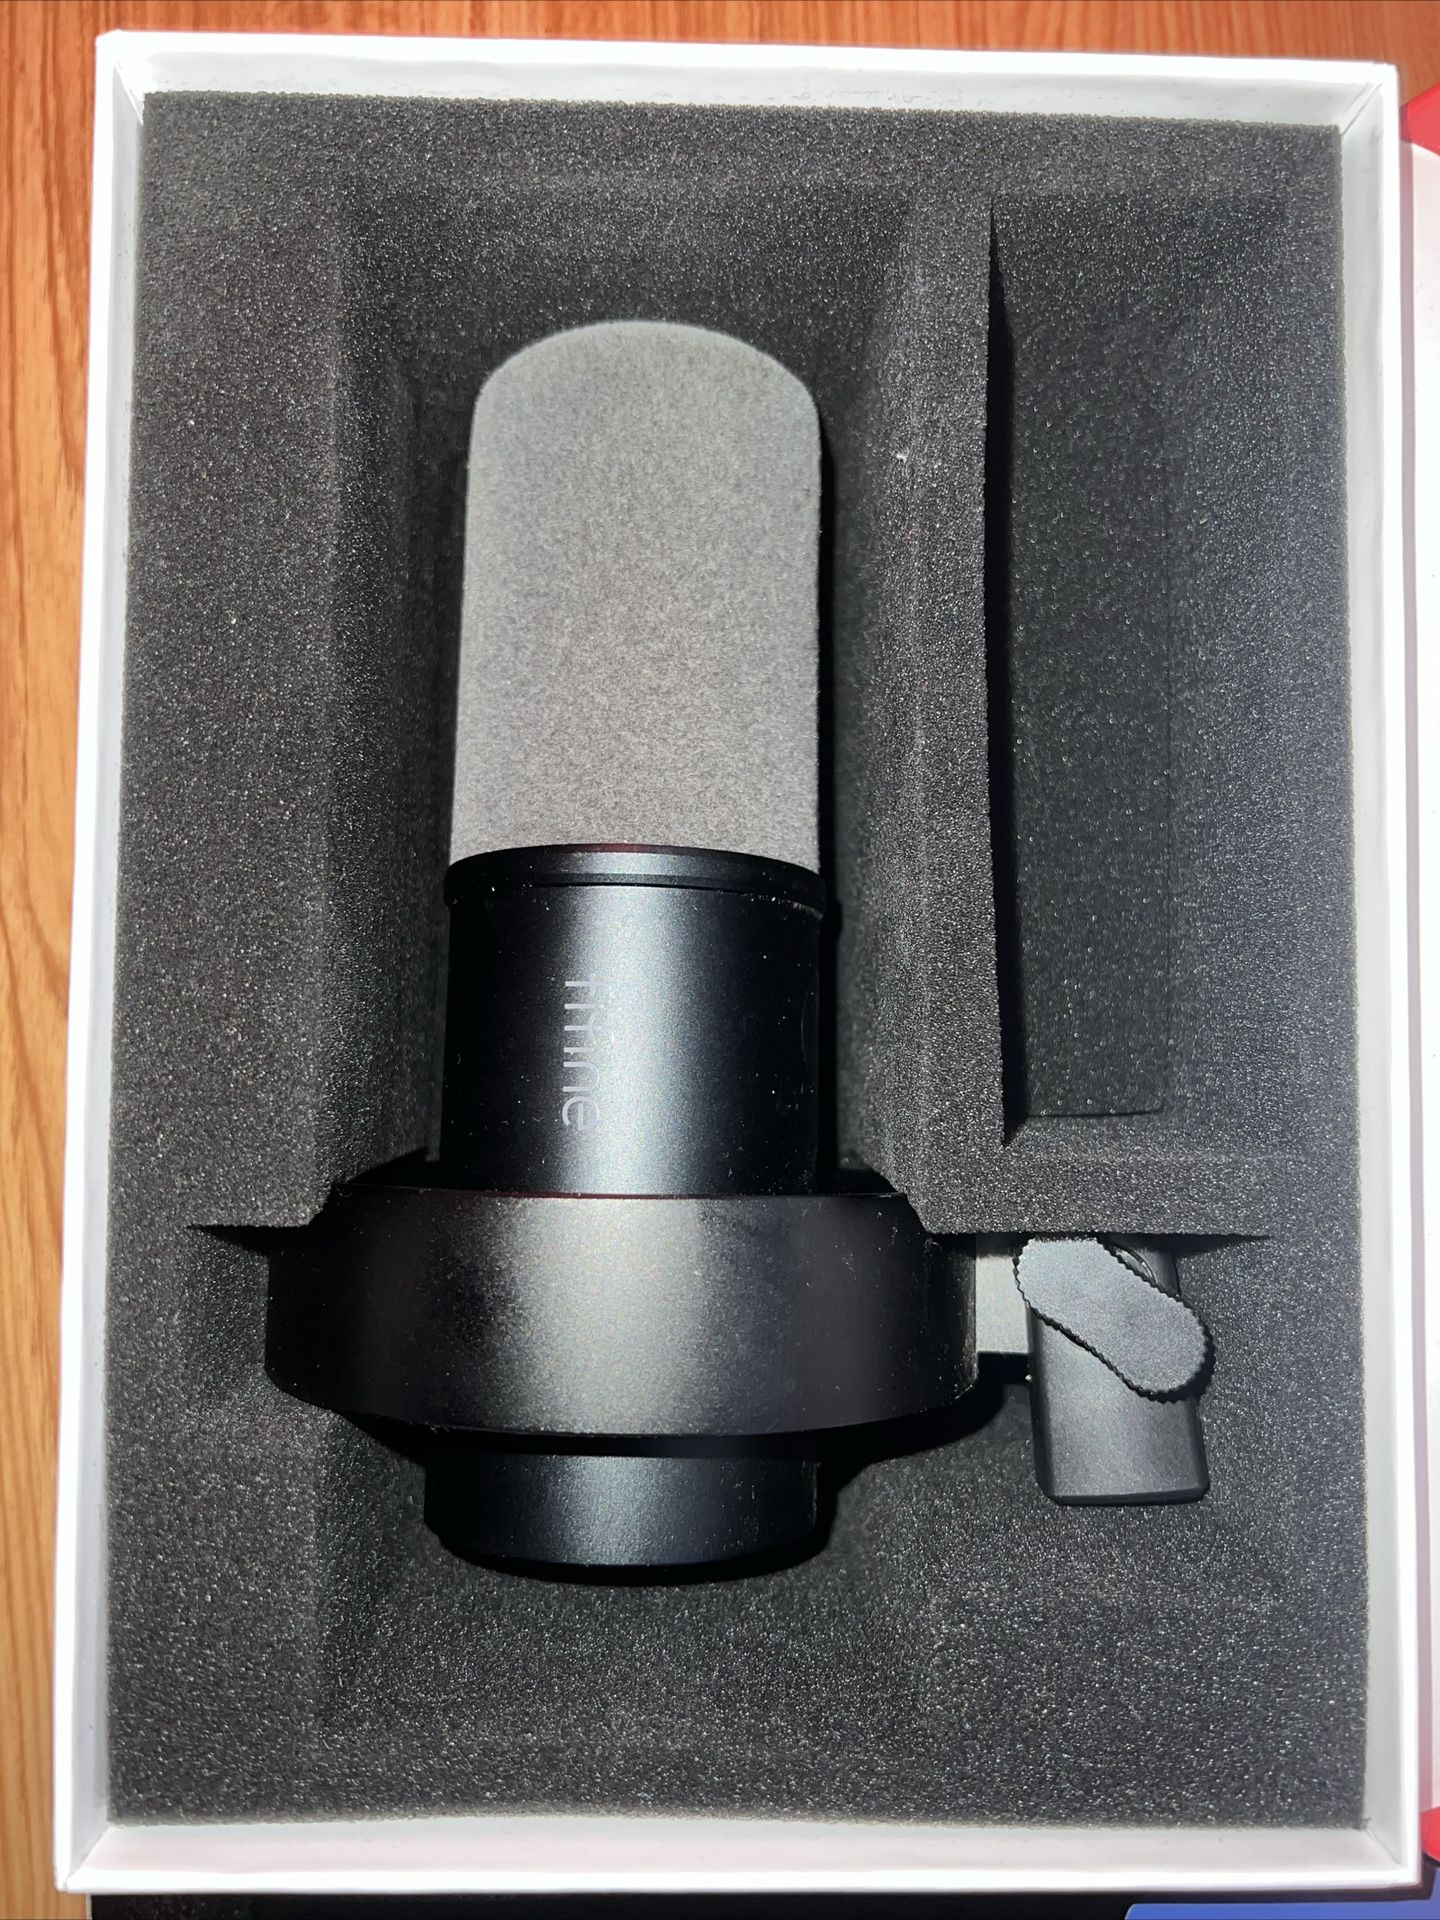 Fifine Gaming microphone and Audio mixer